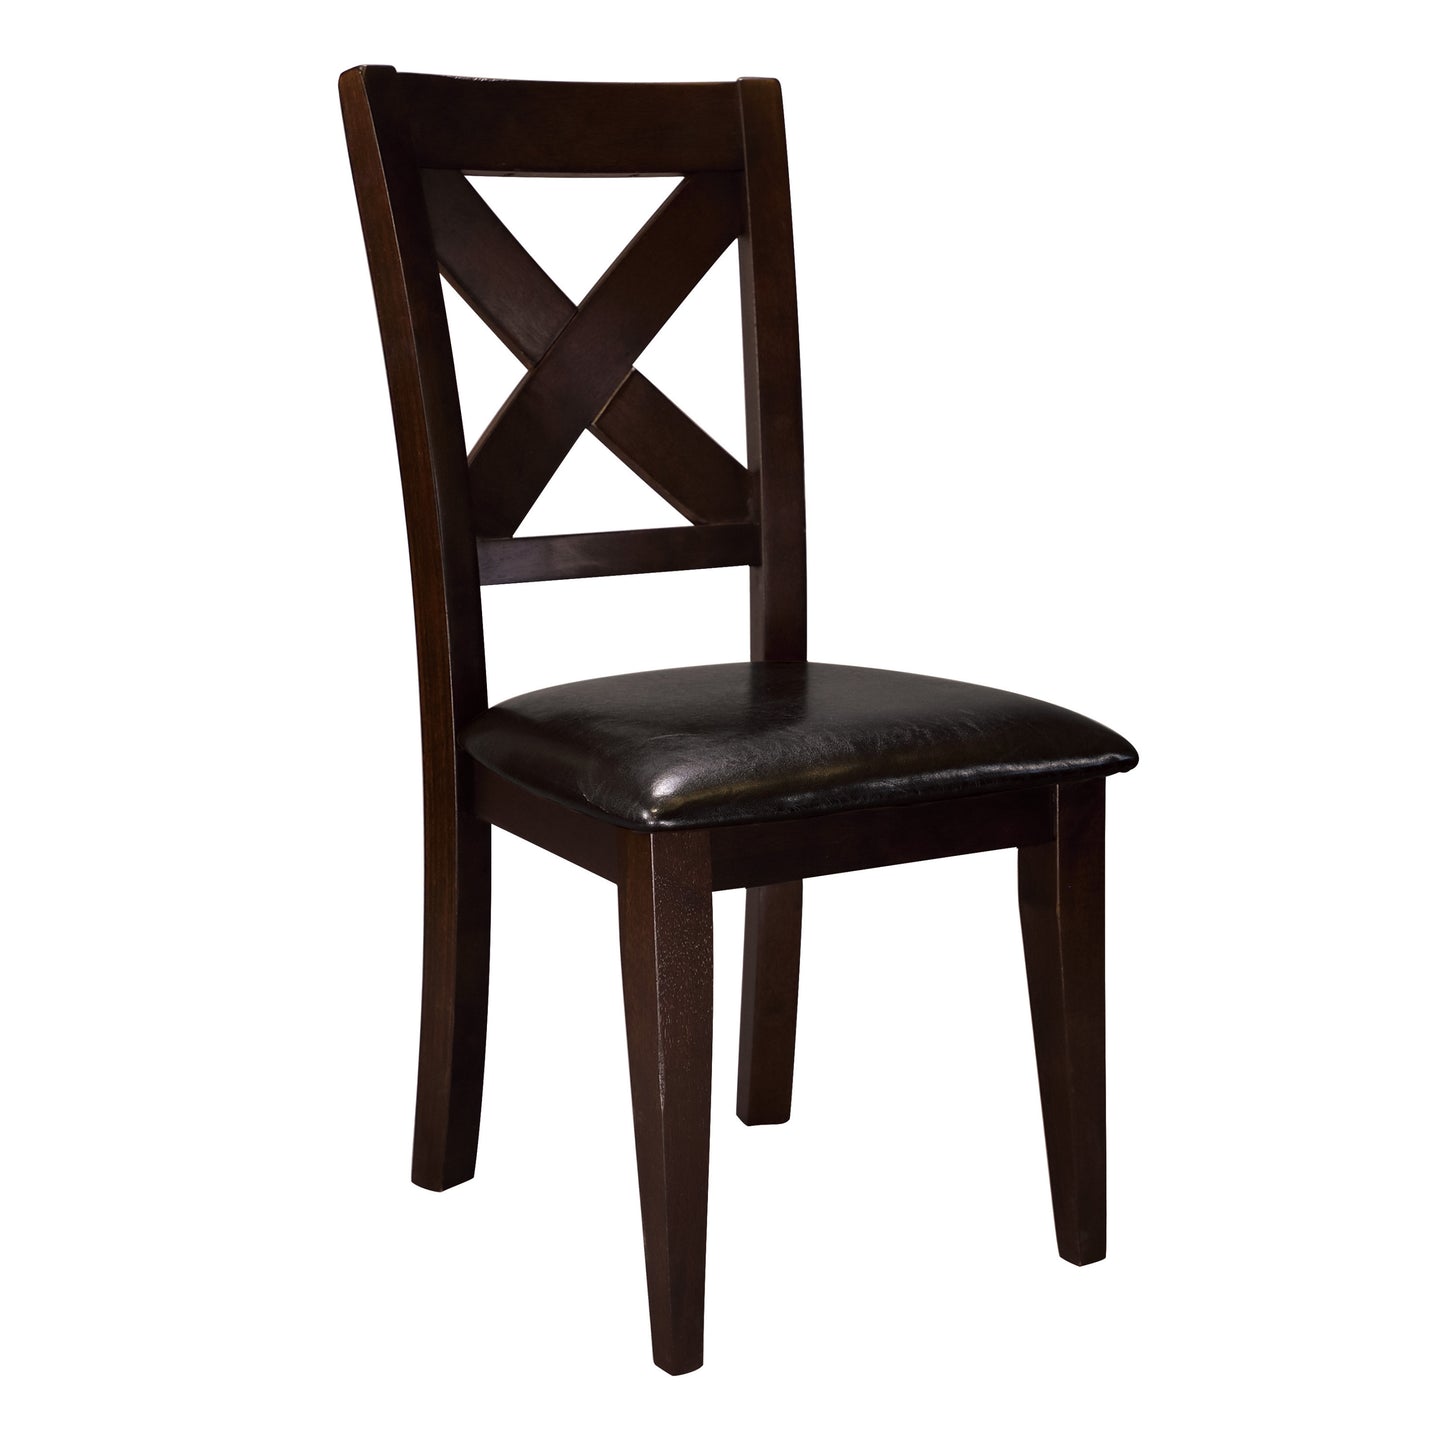 Warm Merlot Finish Set of 2 Side Chairs Leather-Look Brown Seat and X-back Design Durable Furniture